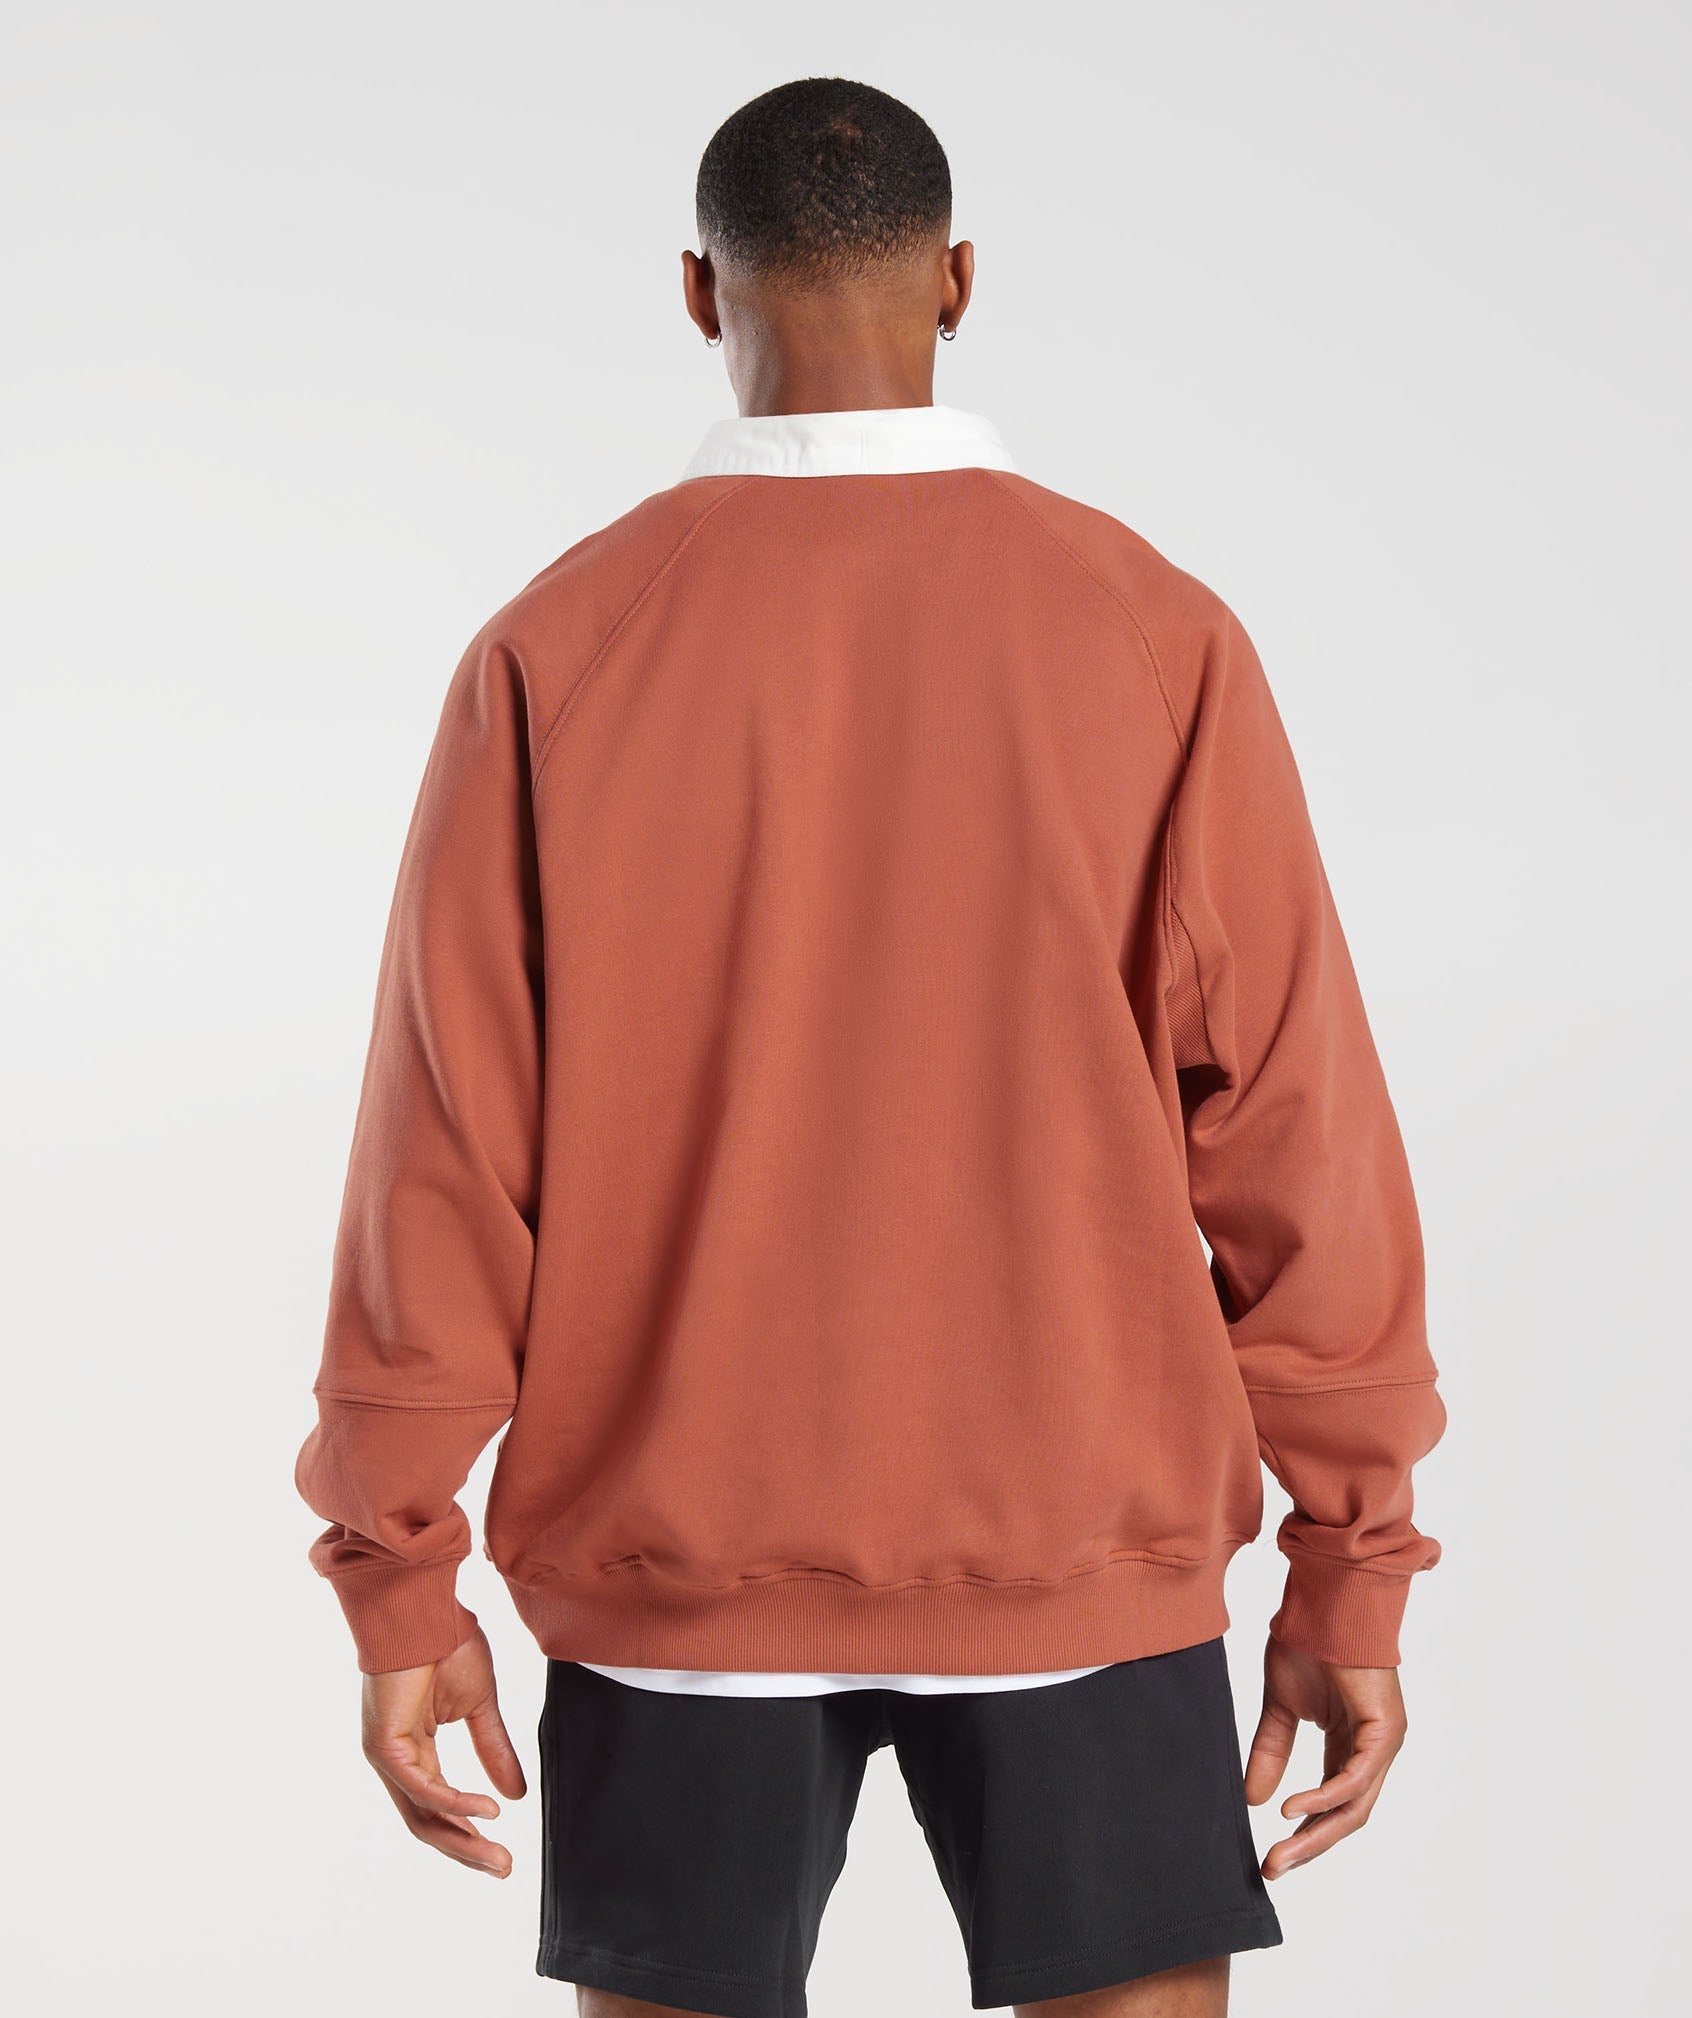 Rest Day Essentials Sweat Polo in Persimmon Red - view 2